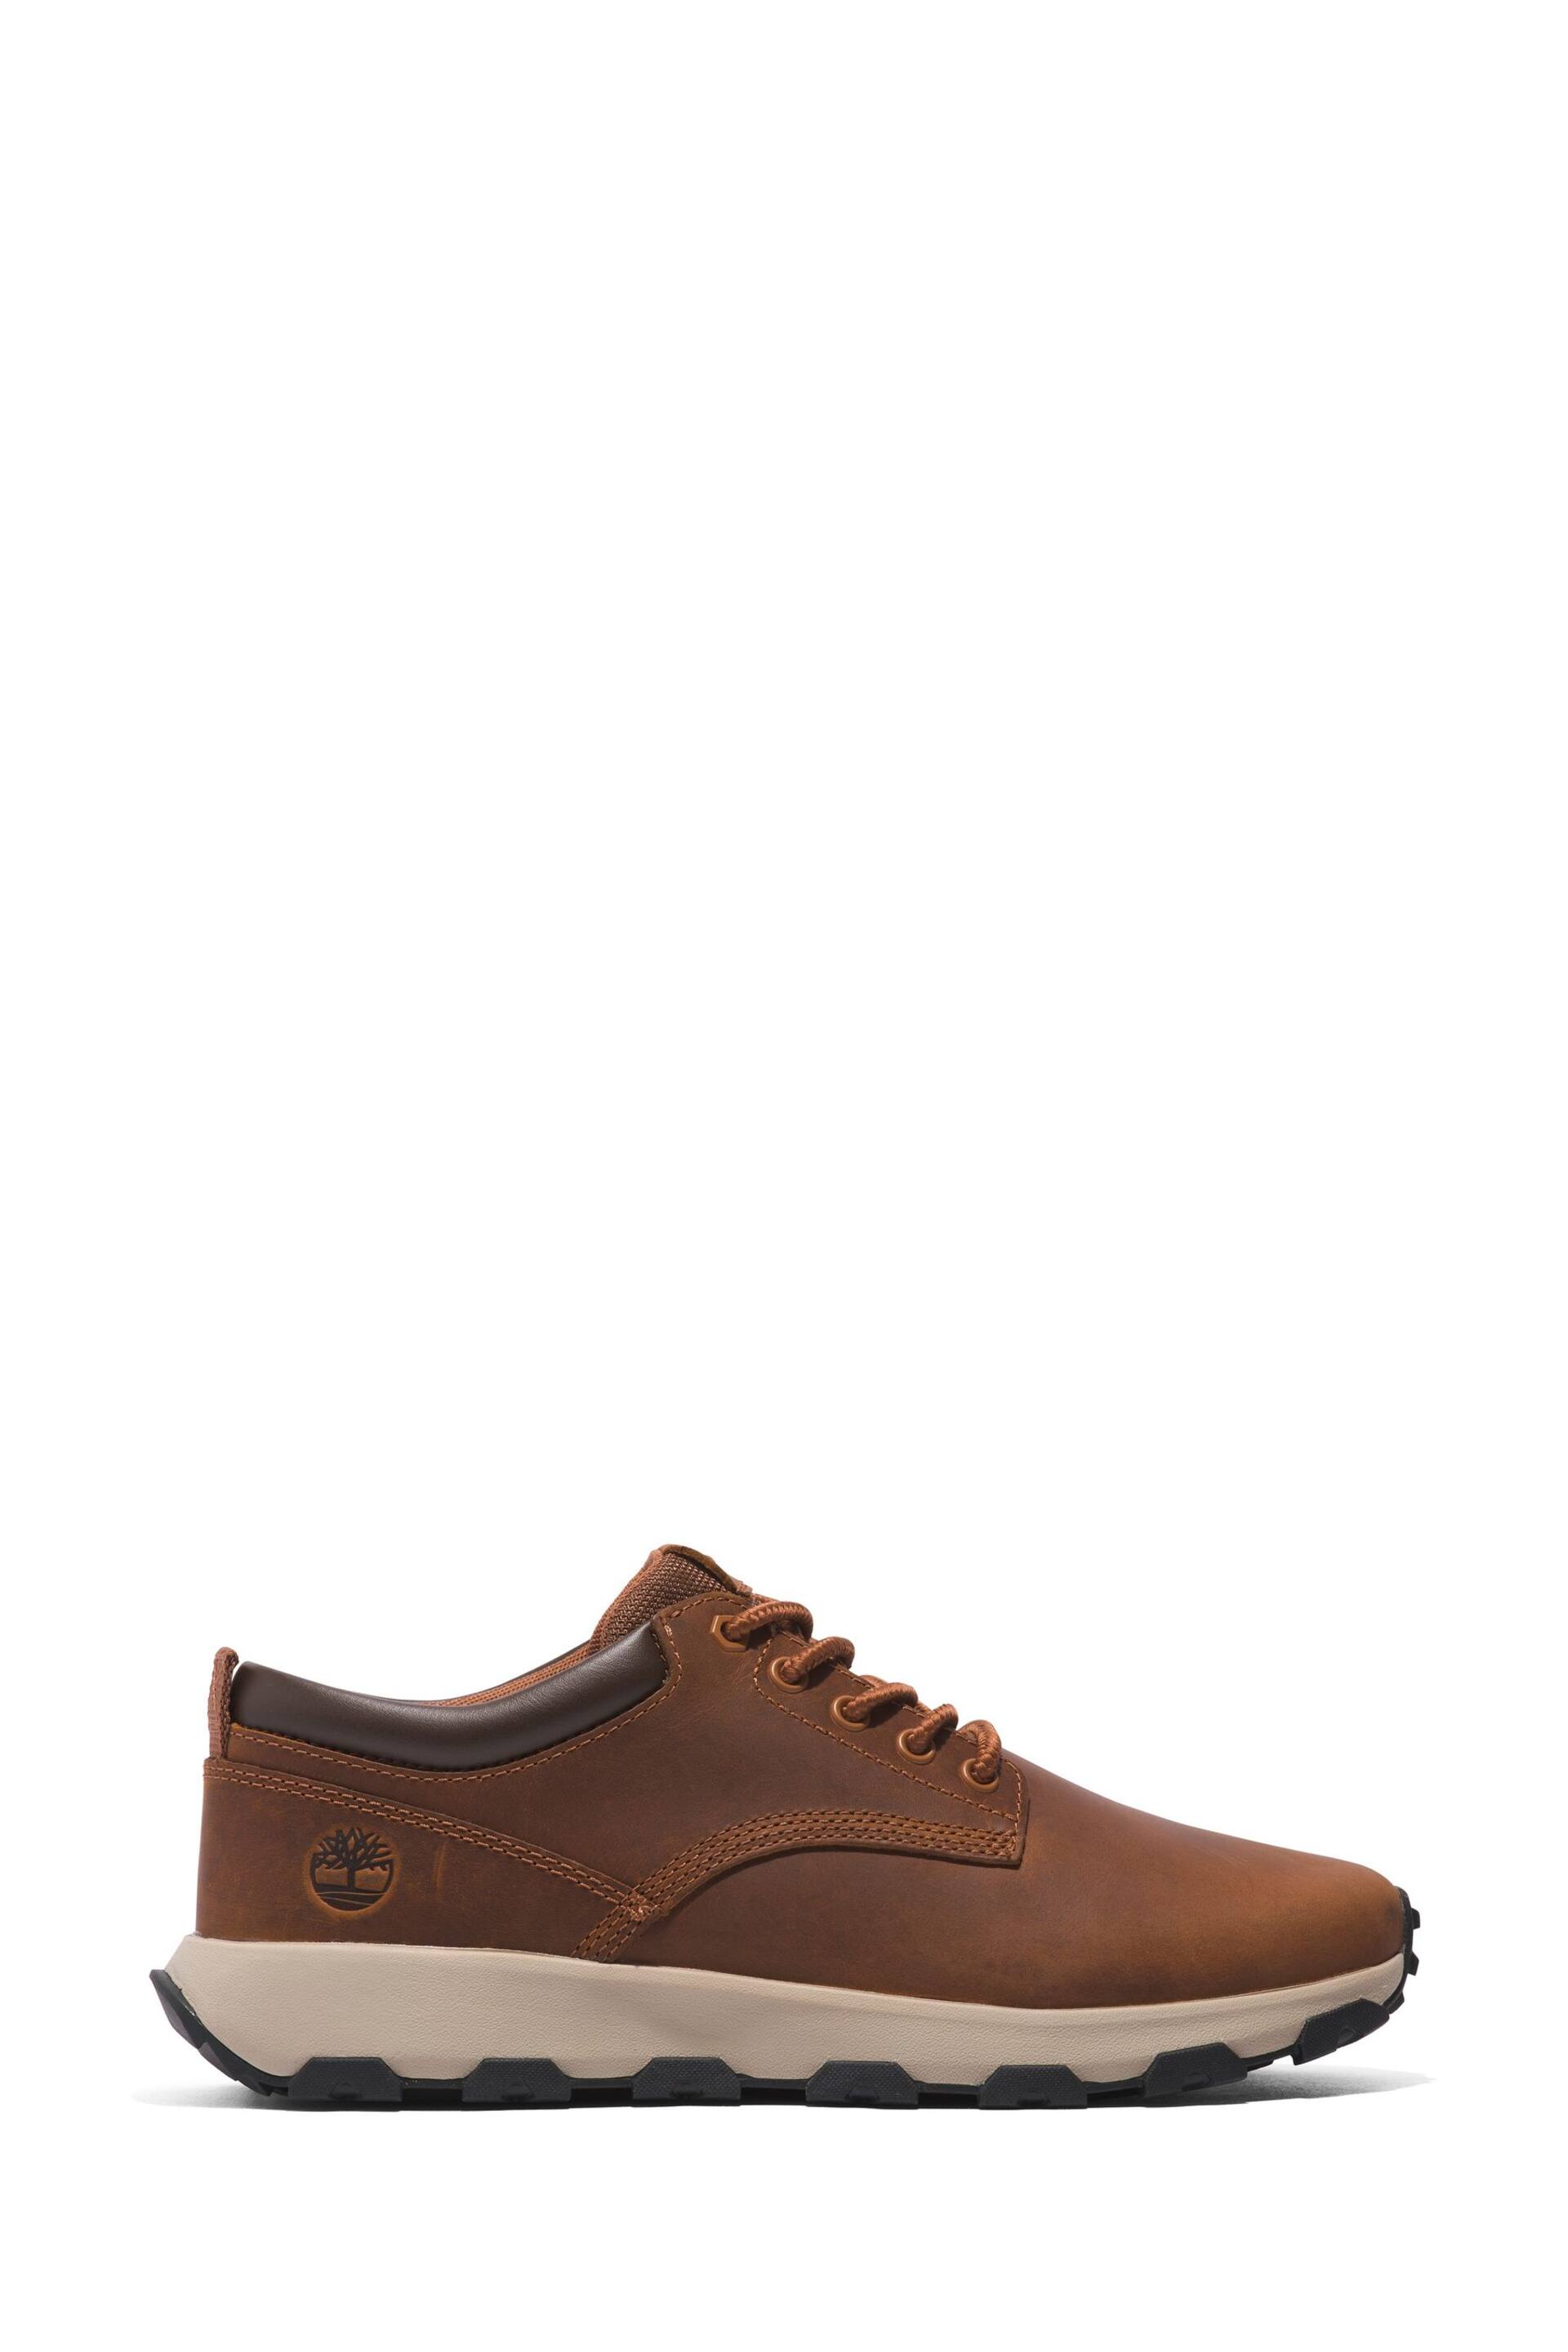 Timberland Winsor Park Ox Brown Trainers - Image 1 of 5